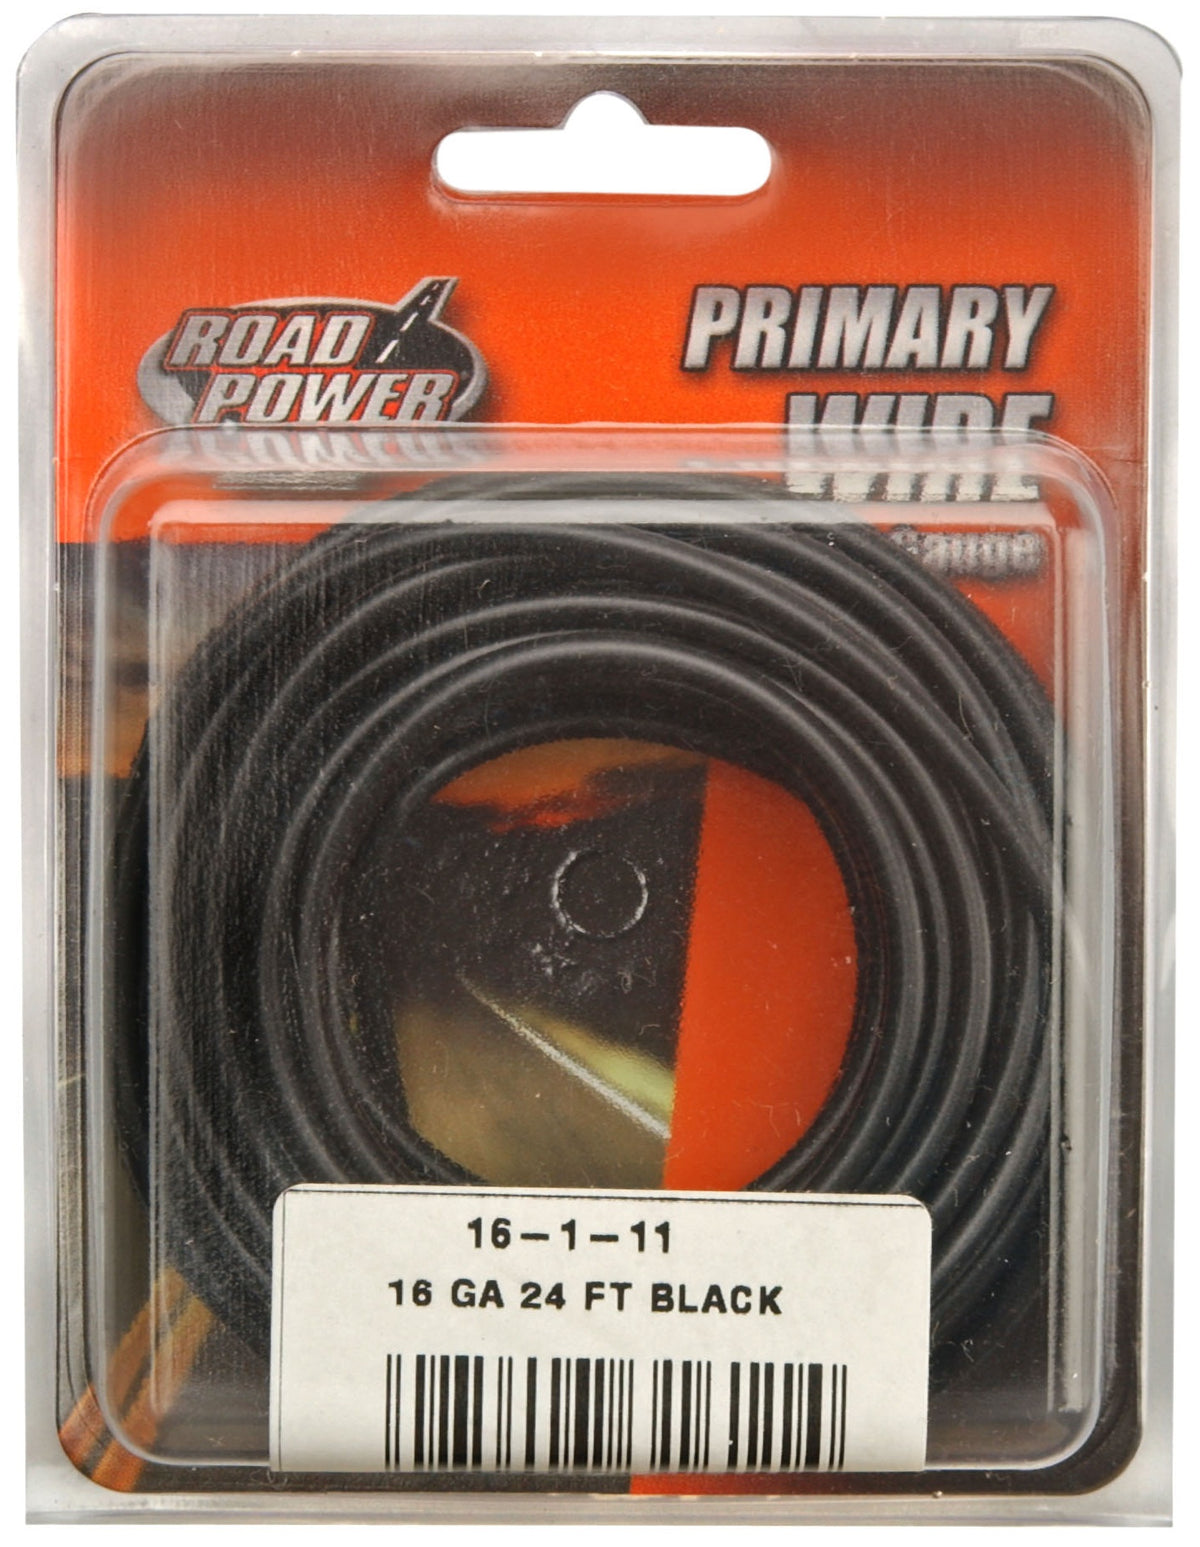 Road Power 55666633 Primary Electrical Wire, 16 Gauge, 24', Black